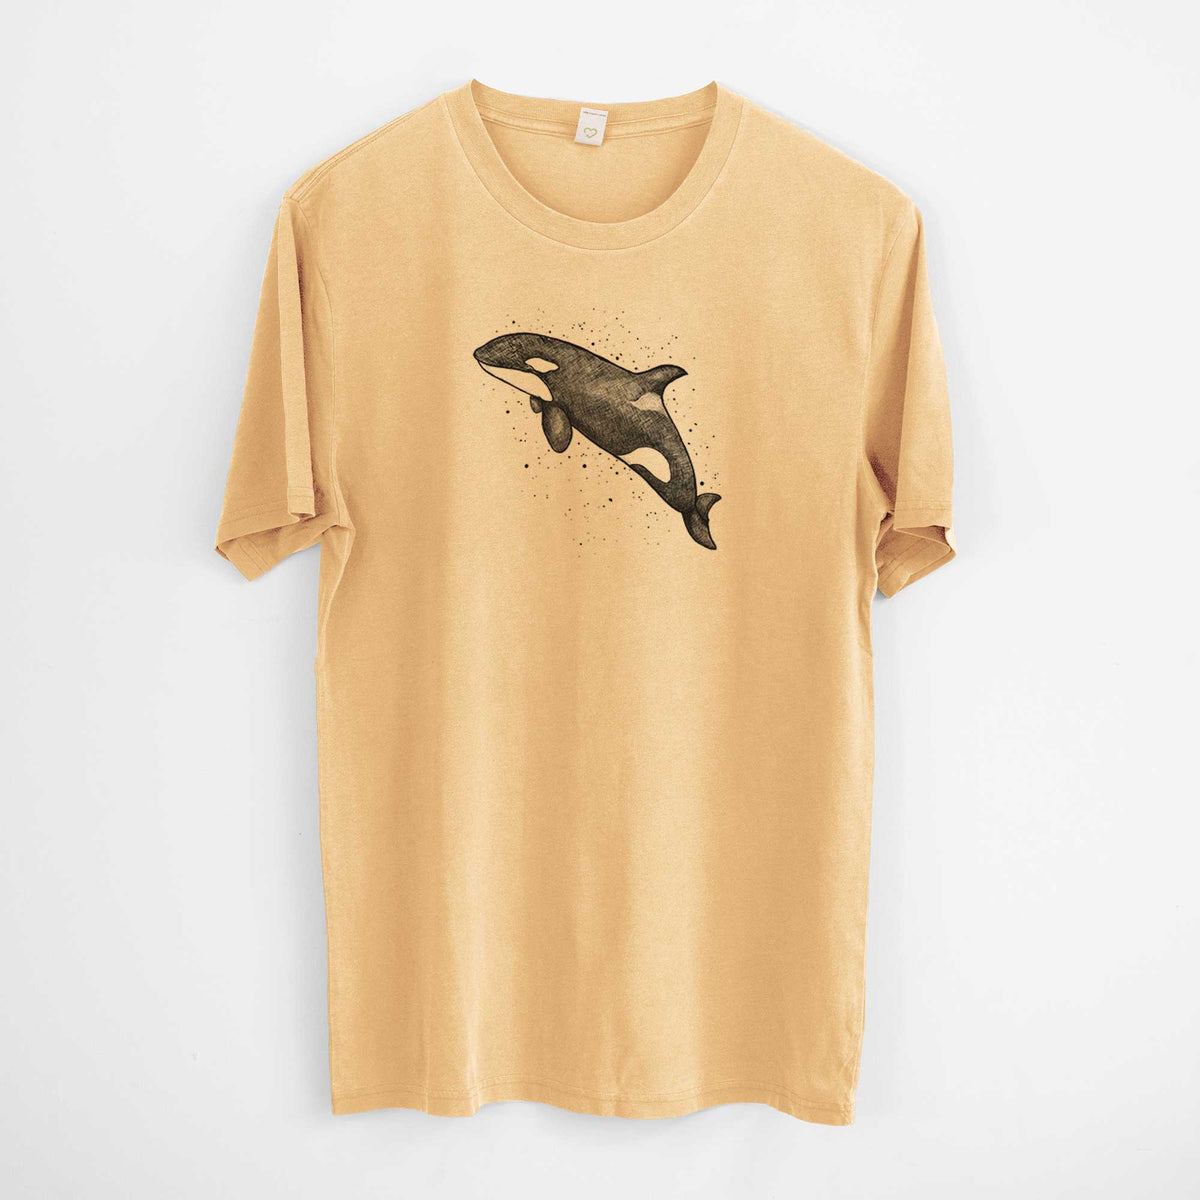 Orca Whale -  Mineral Wash 100% Organic Cotton Short Sleeve